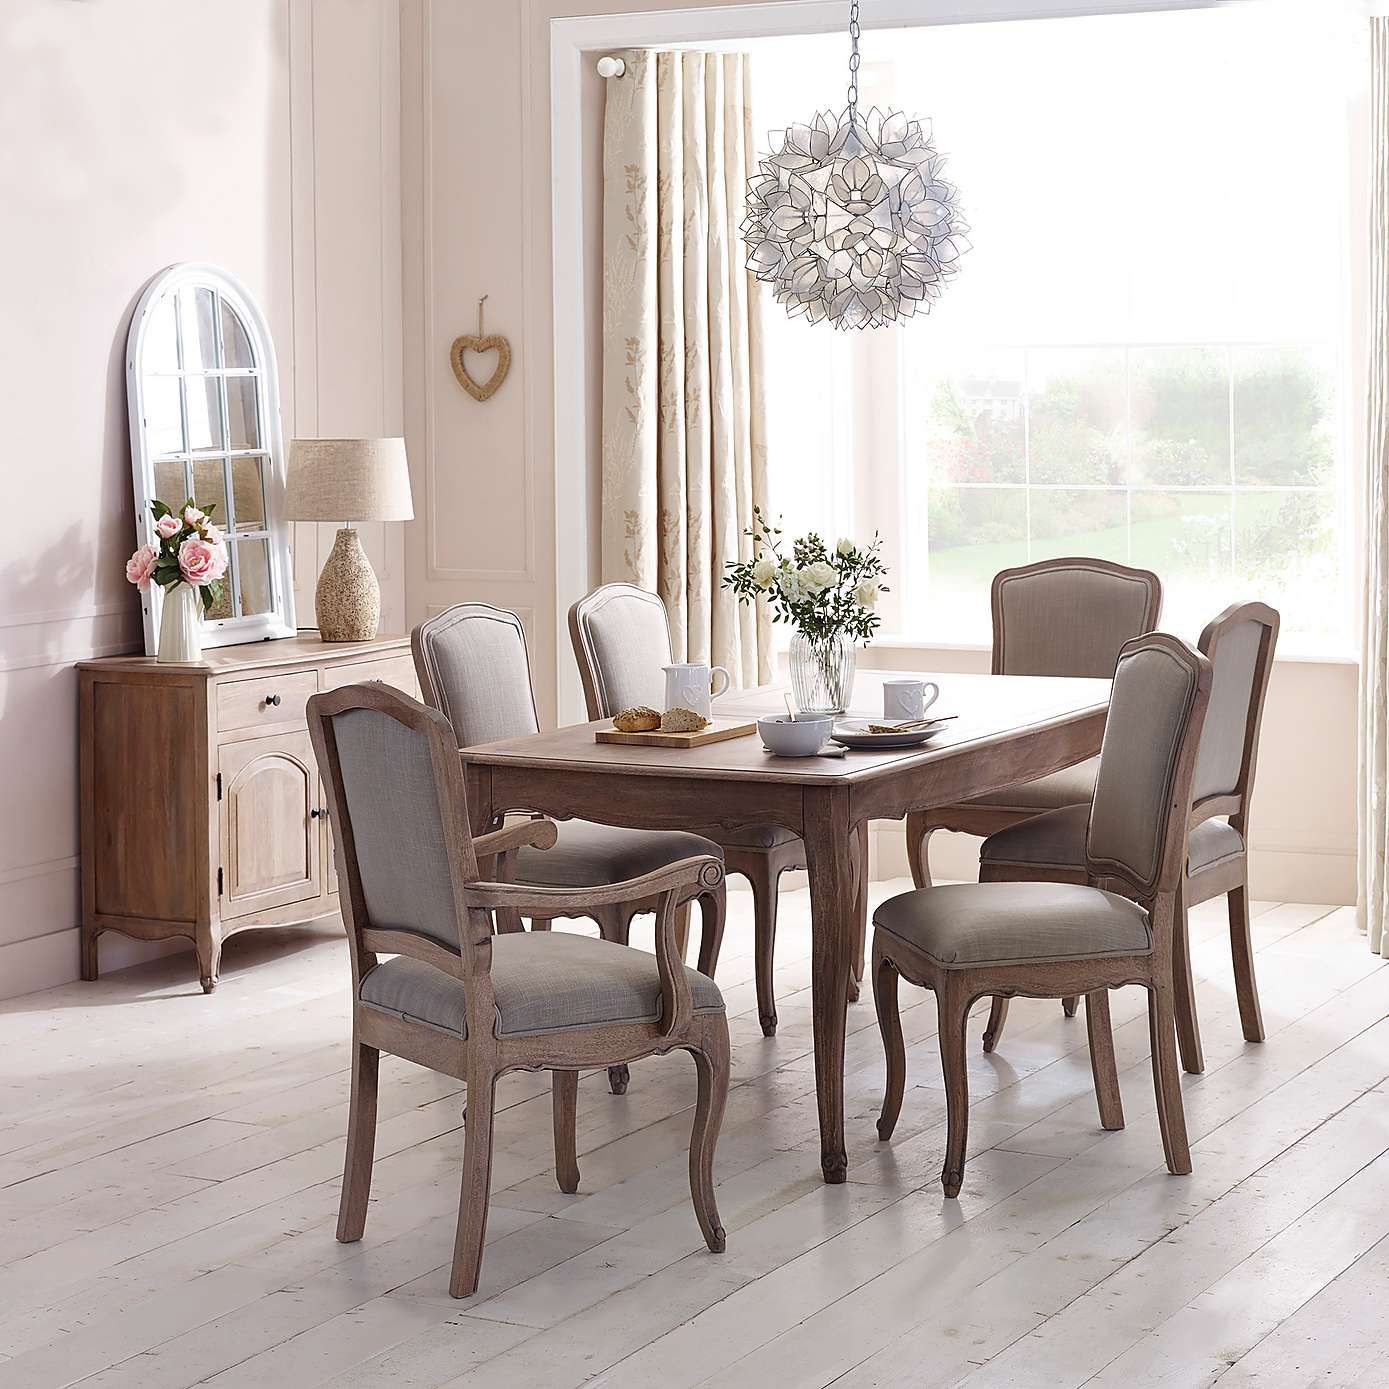 Amelie Extending Dining Table Beauchamp House Extendable for dimensions 1389 X 1389